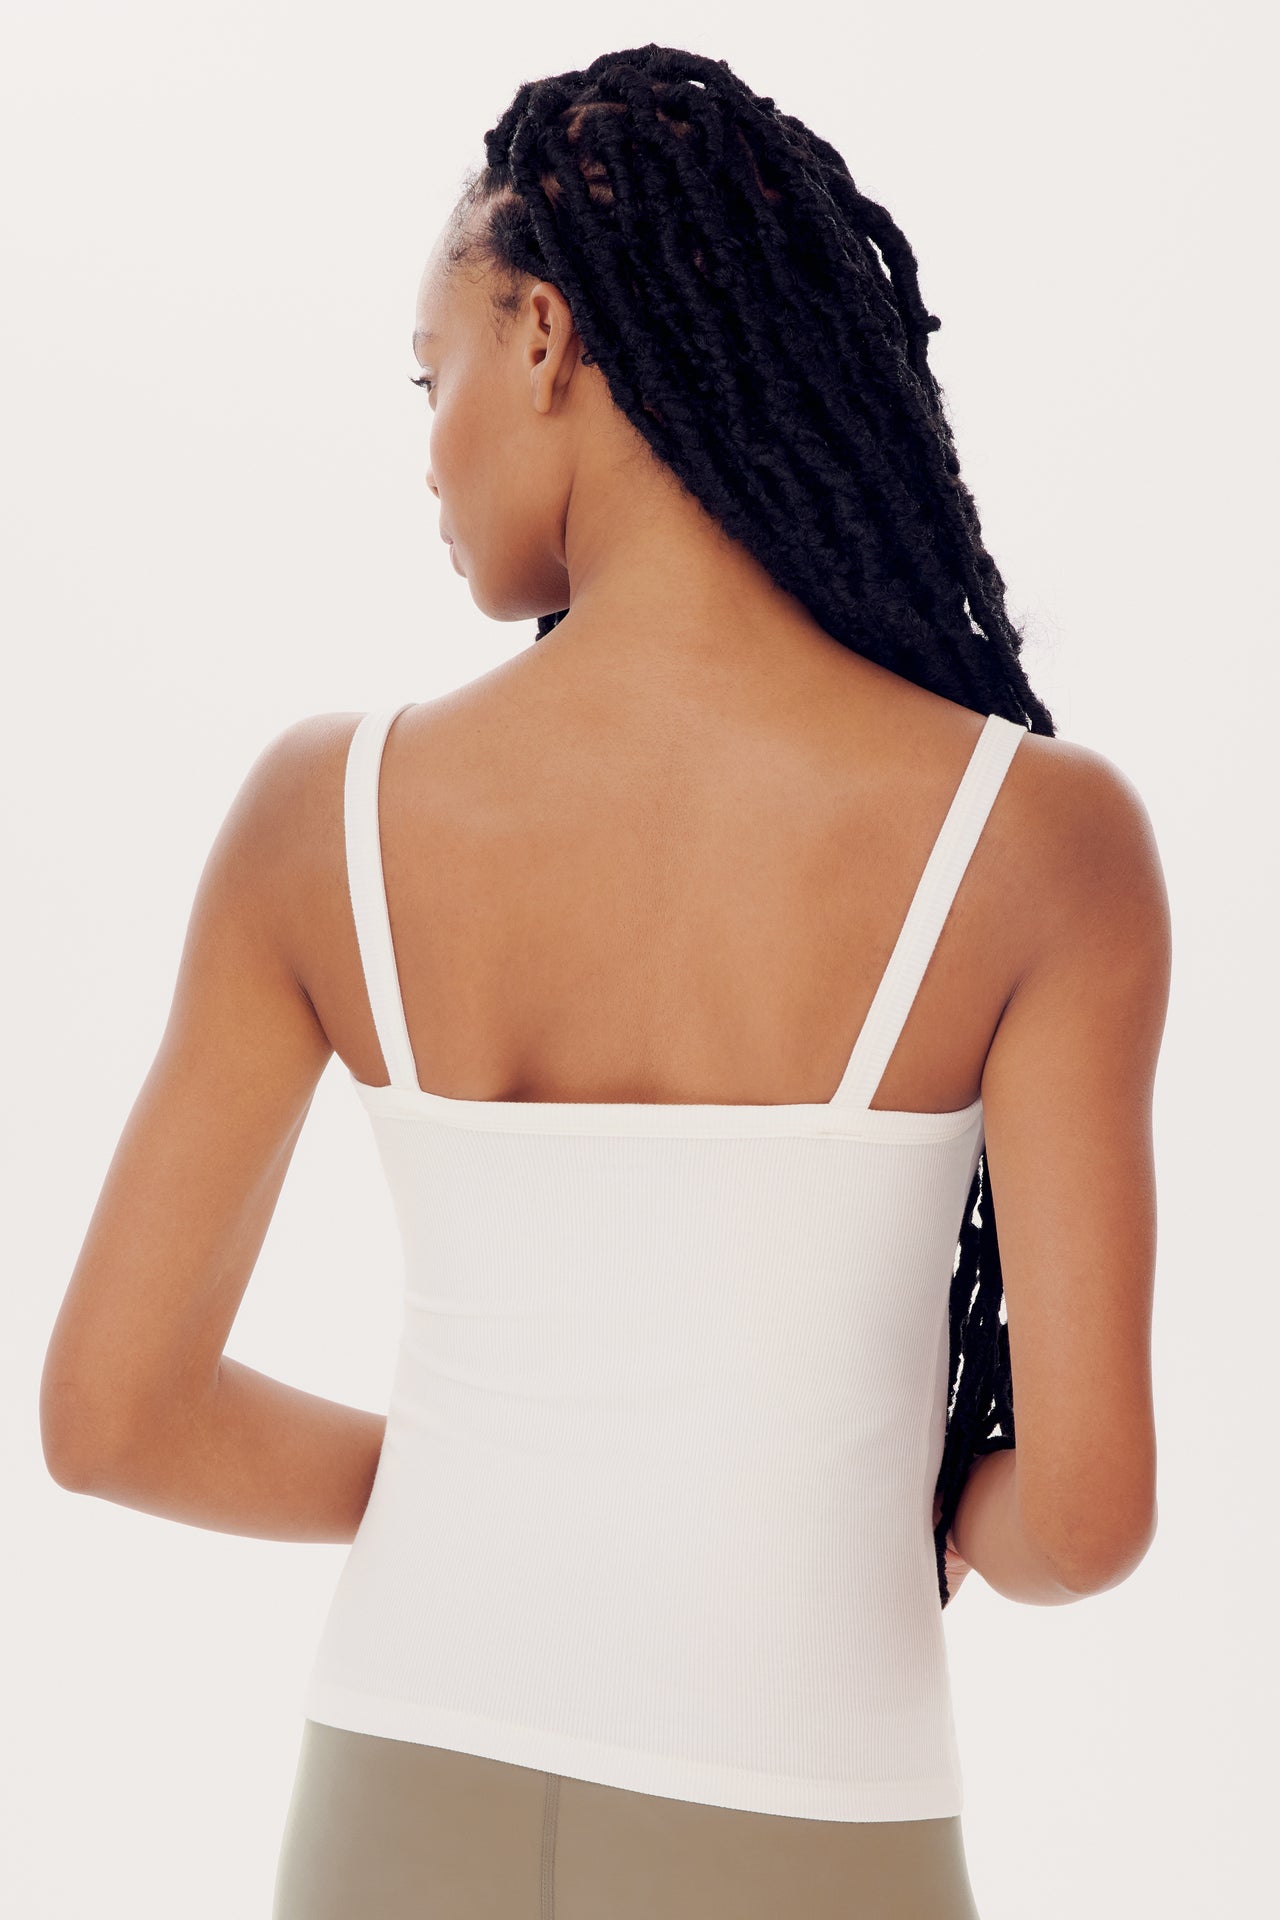 A woman seen from behind, wearing a SPLITS59 Romy Rib Tank - White and khaki pants, her dark braided hair draped over one shoulder.